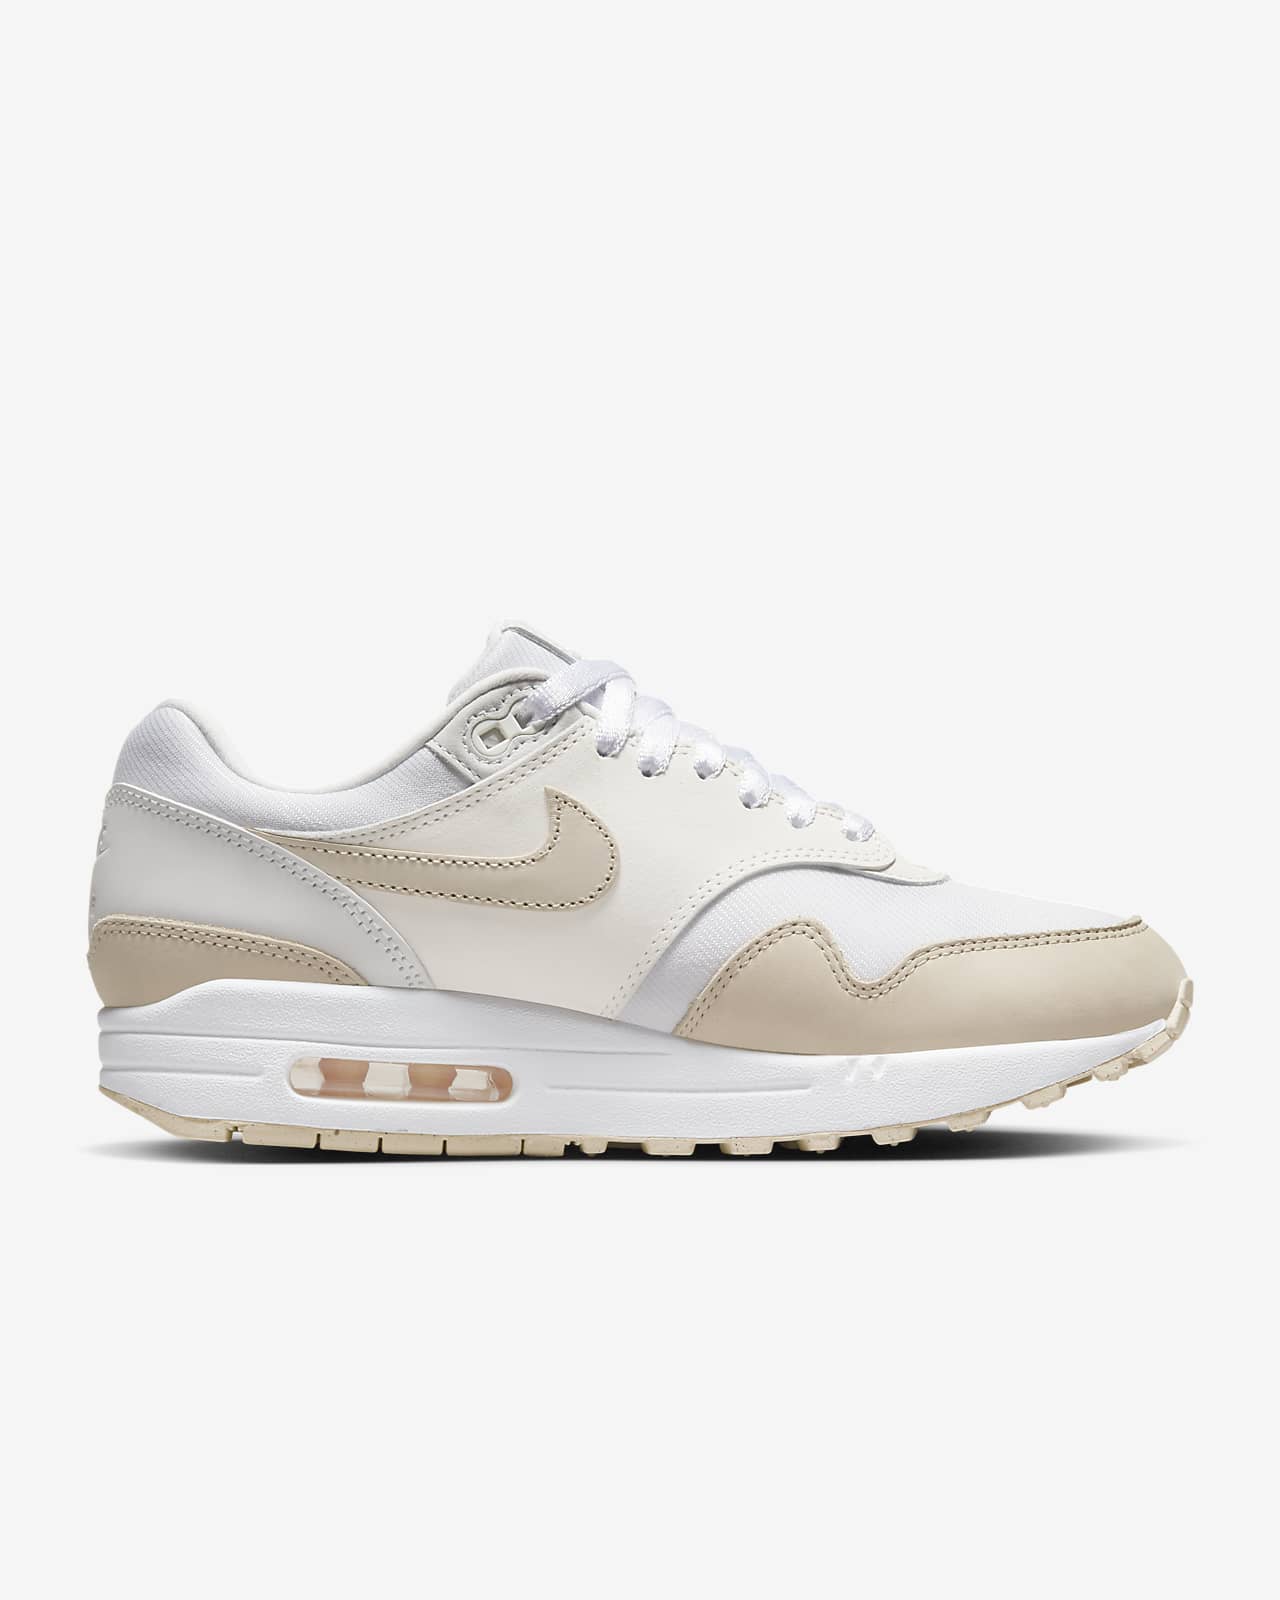 The All-Time Greatest Nike Air Max 1s: Part One - Sneaker Freaker